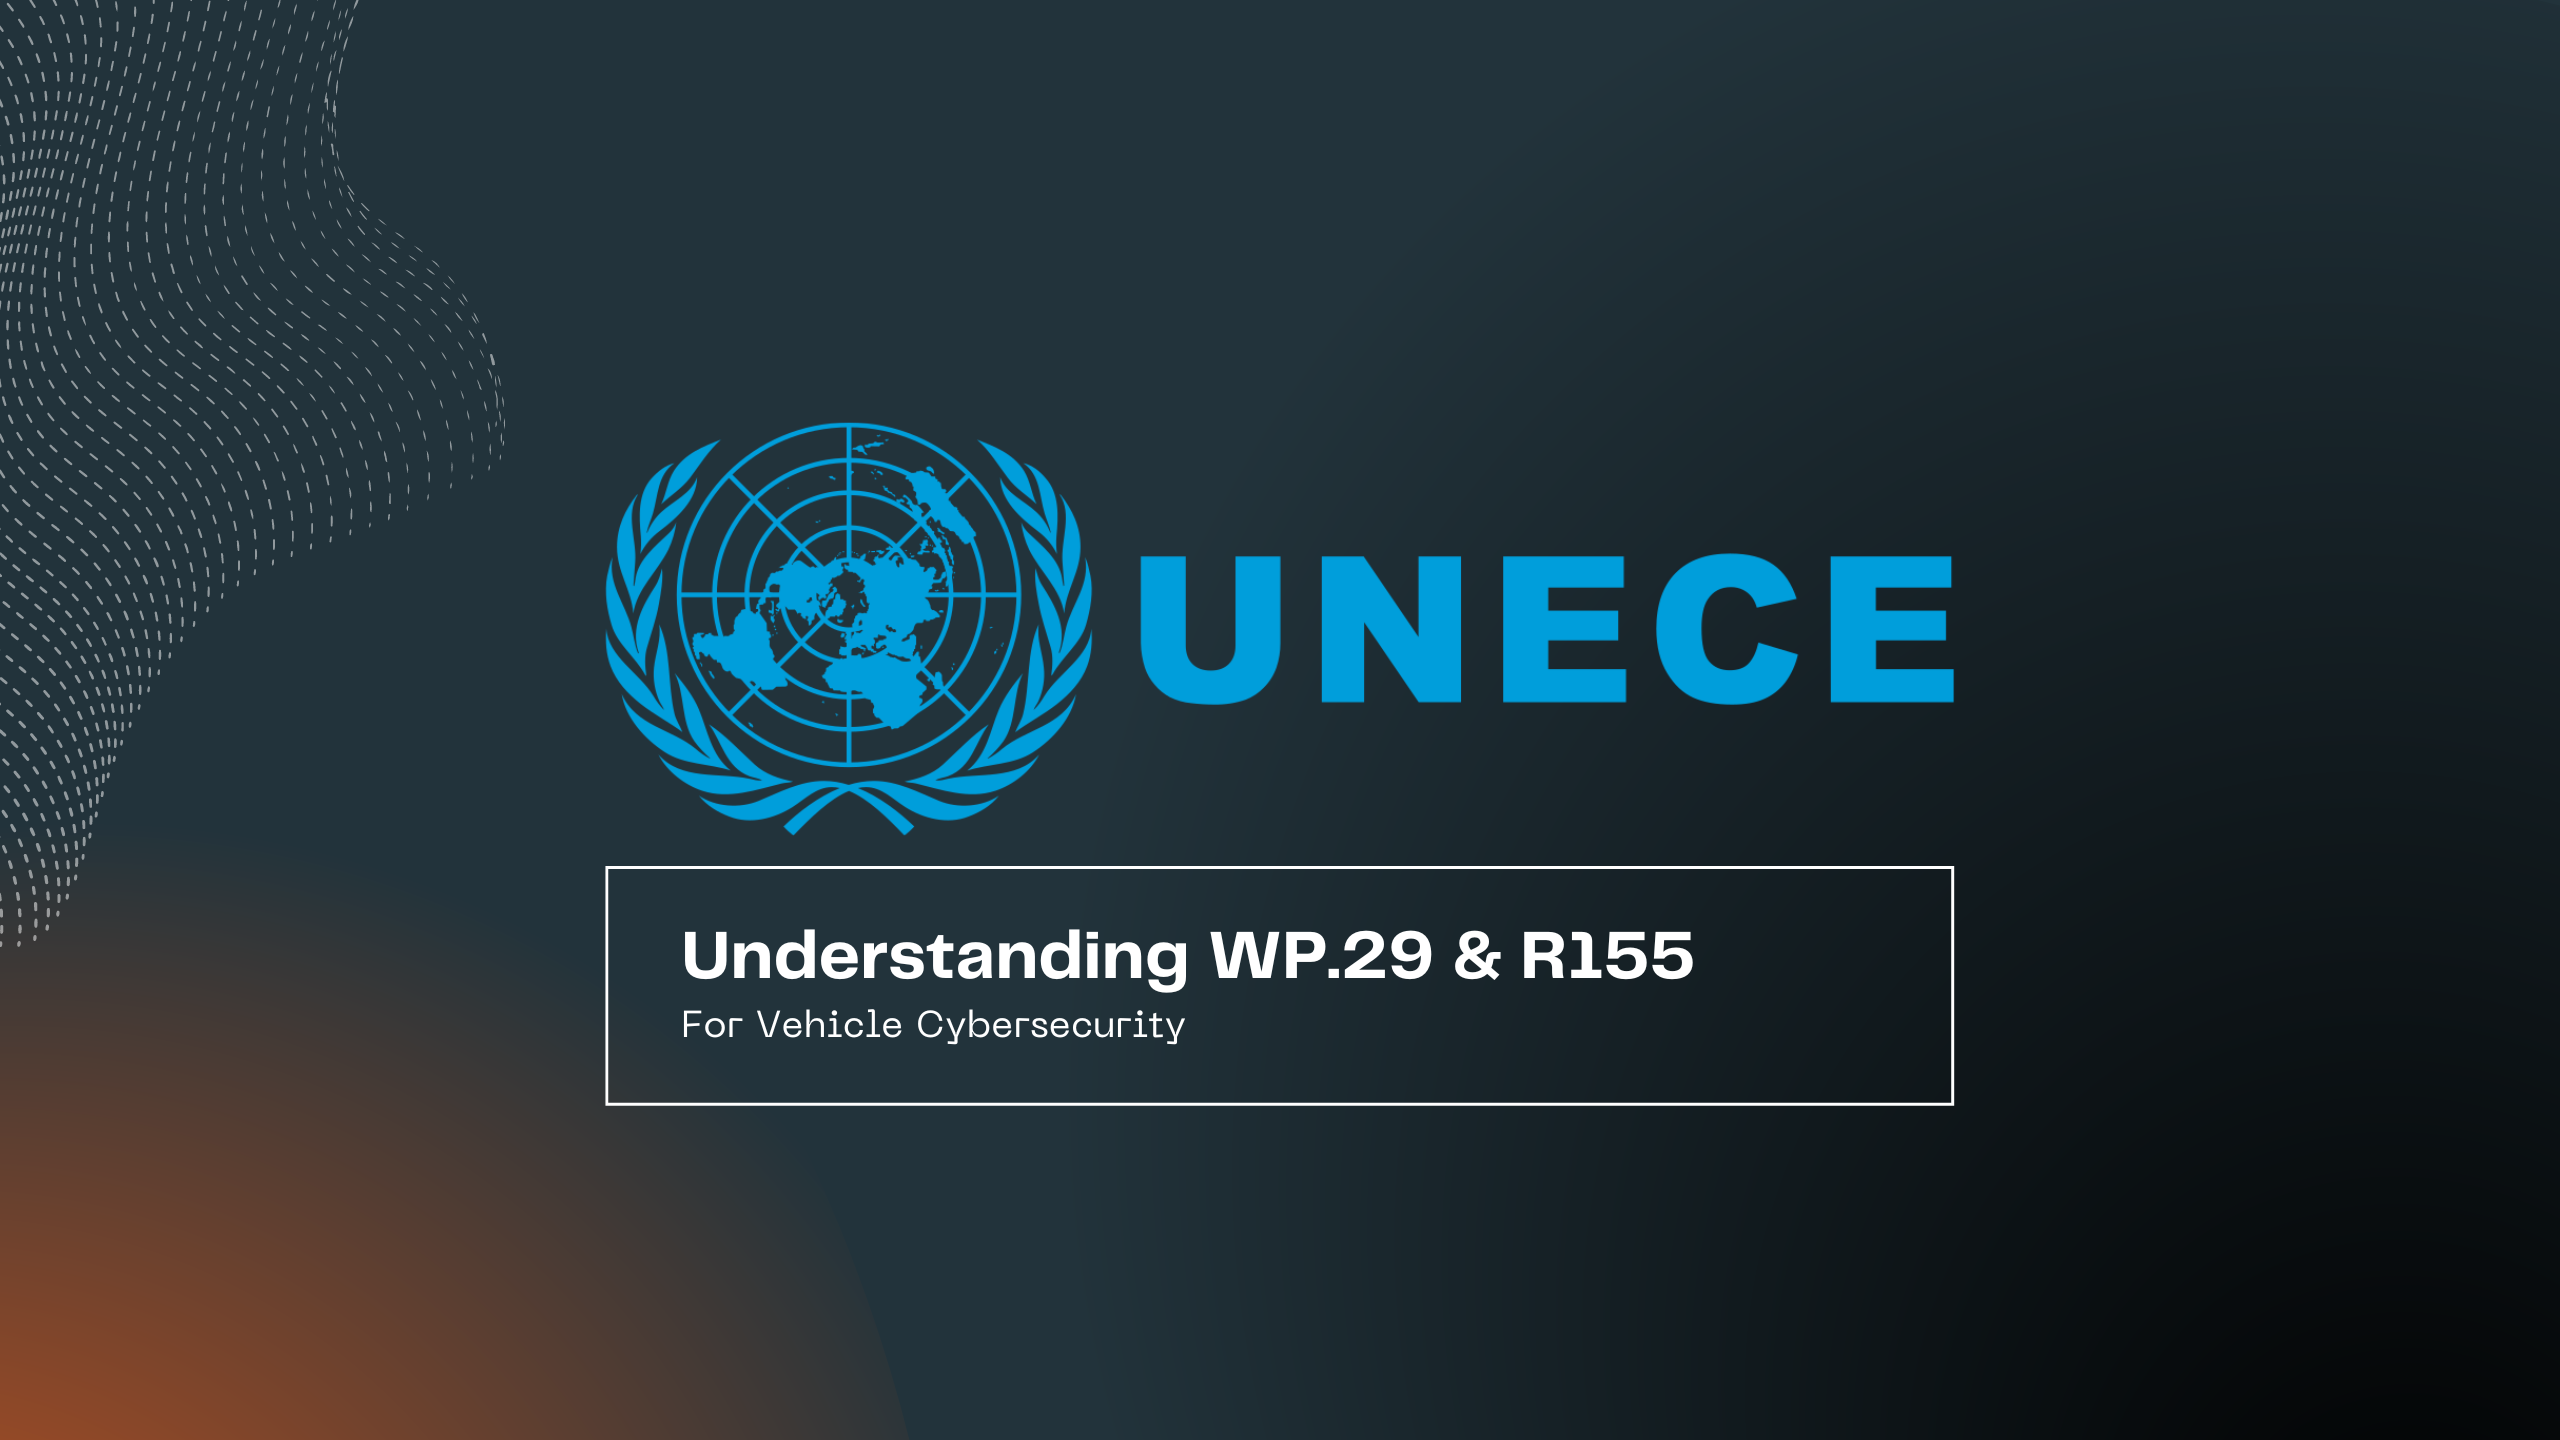 Cybersecurity Regulations For Connected Vehicles: UN R155